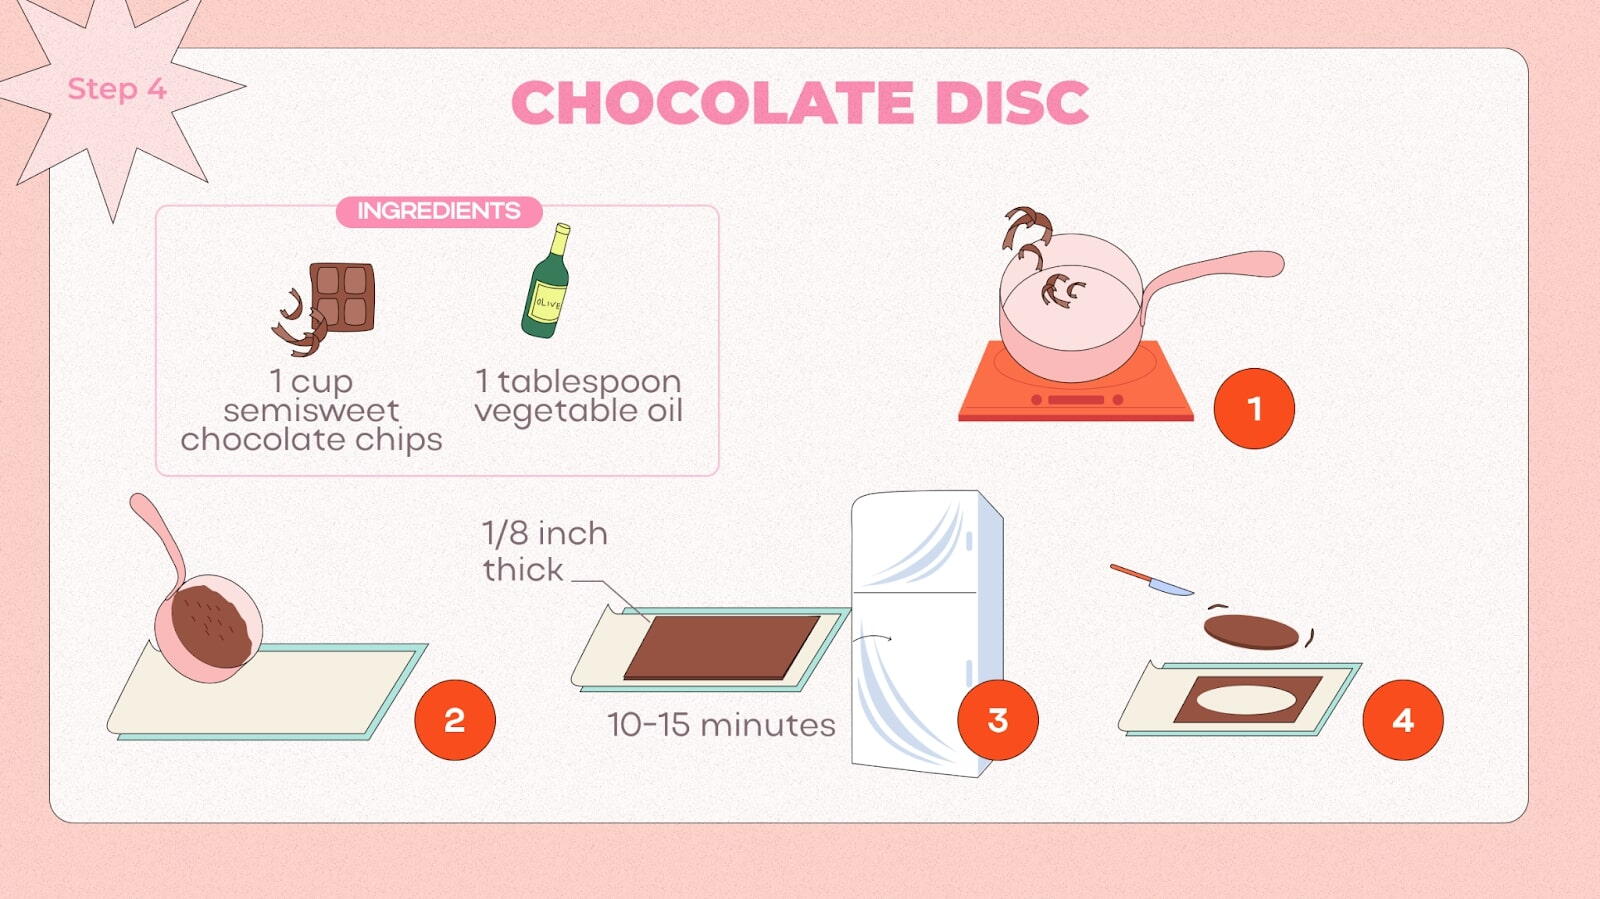 Instruction for make the Chocolate Disc